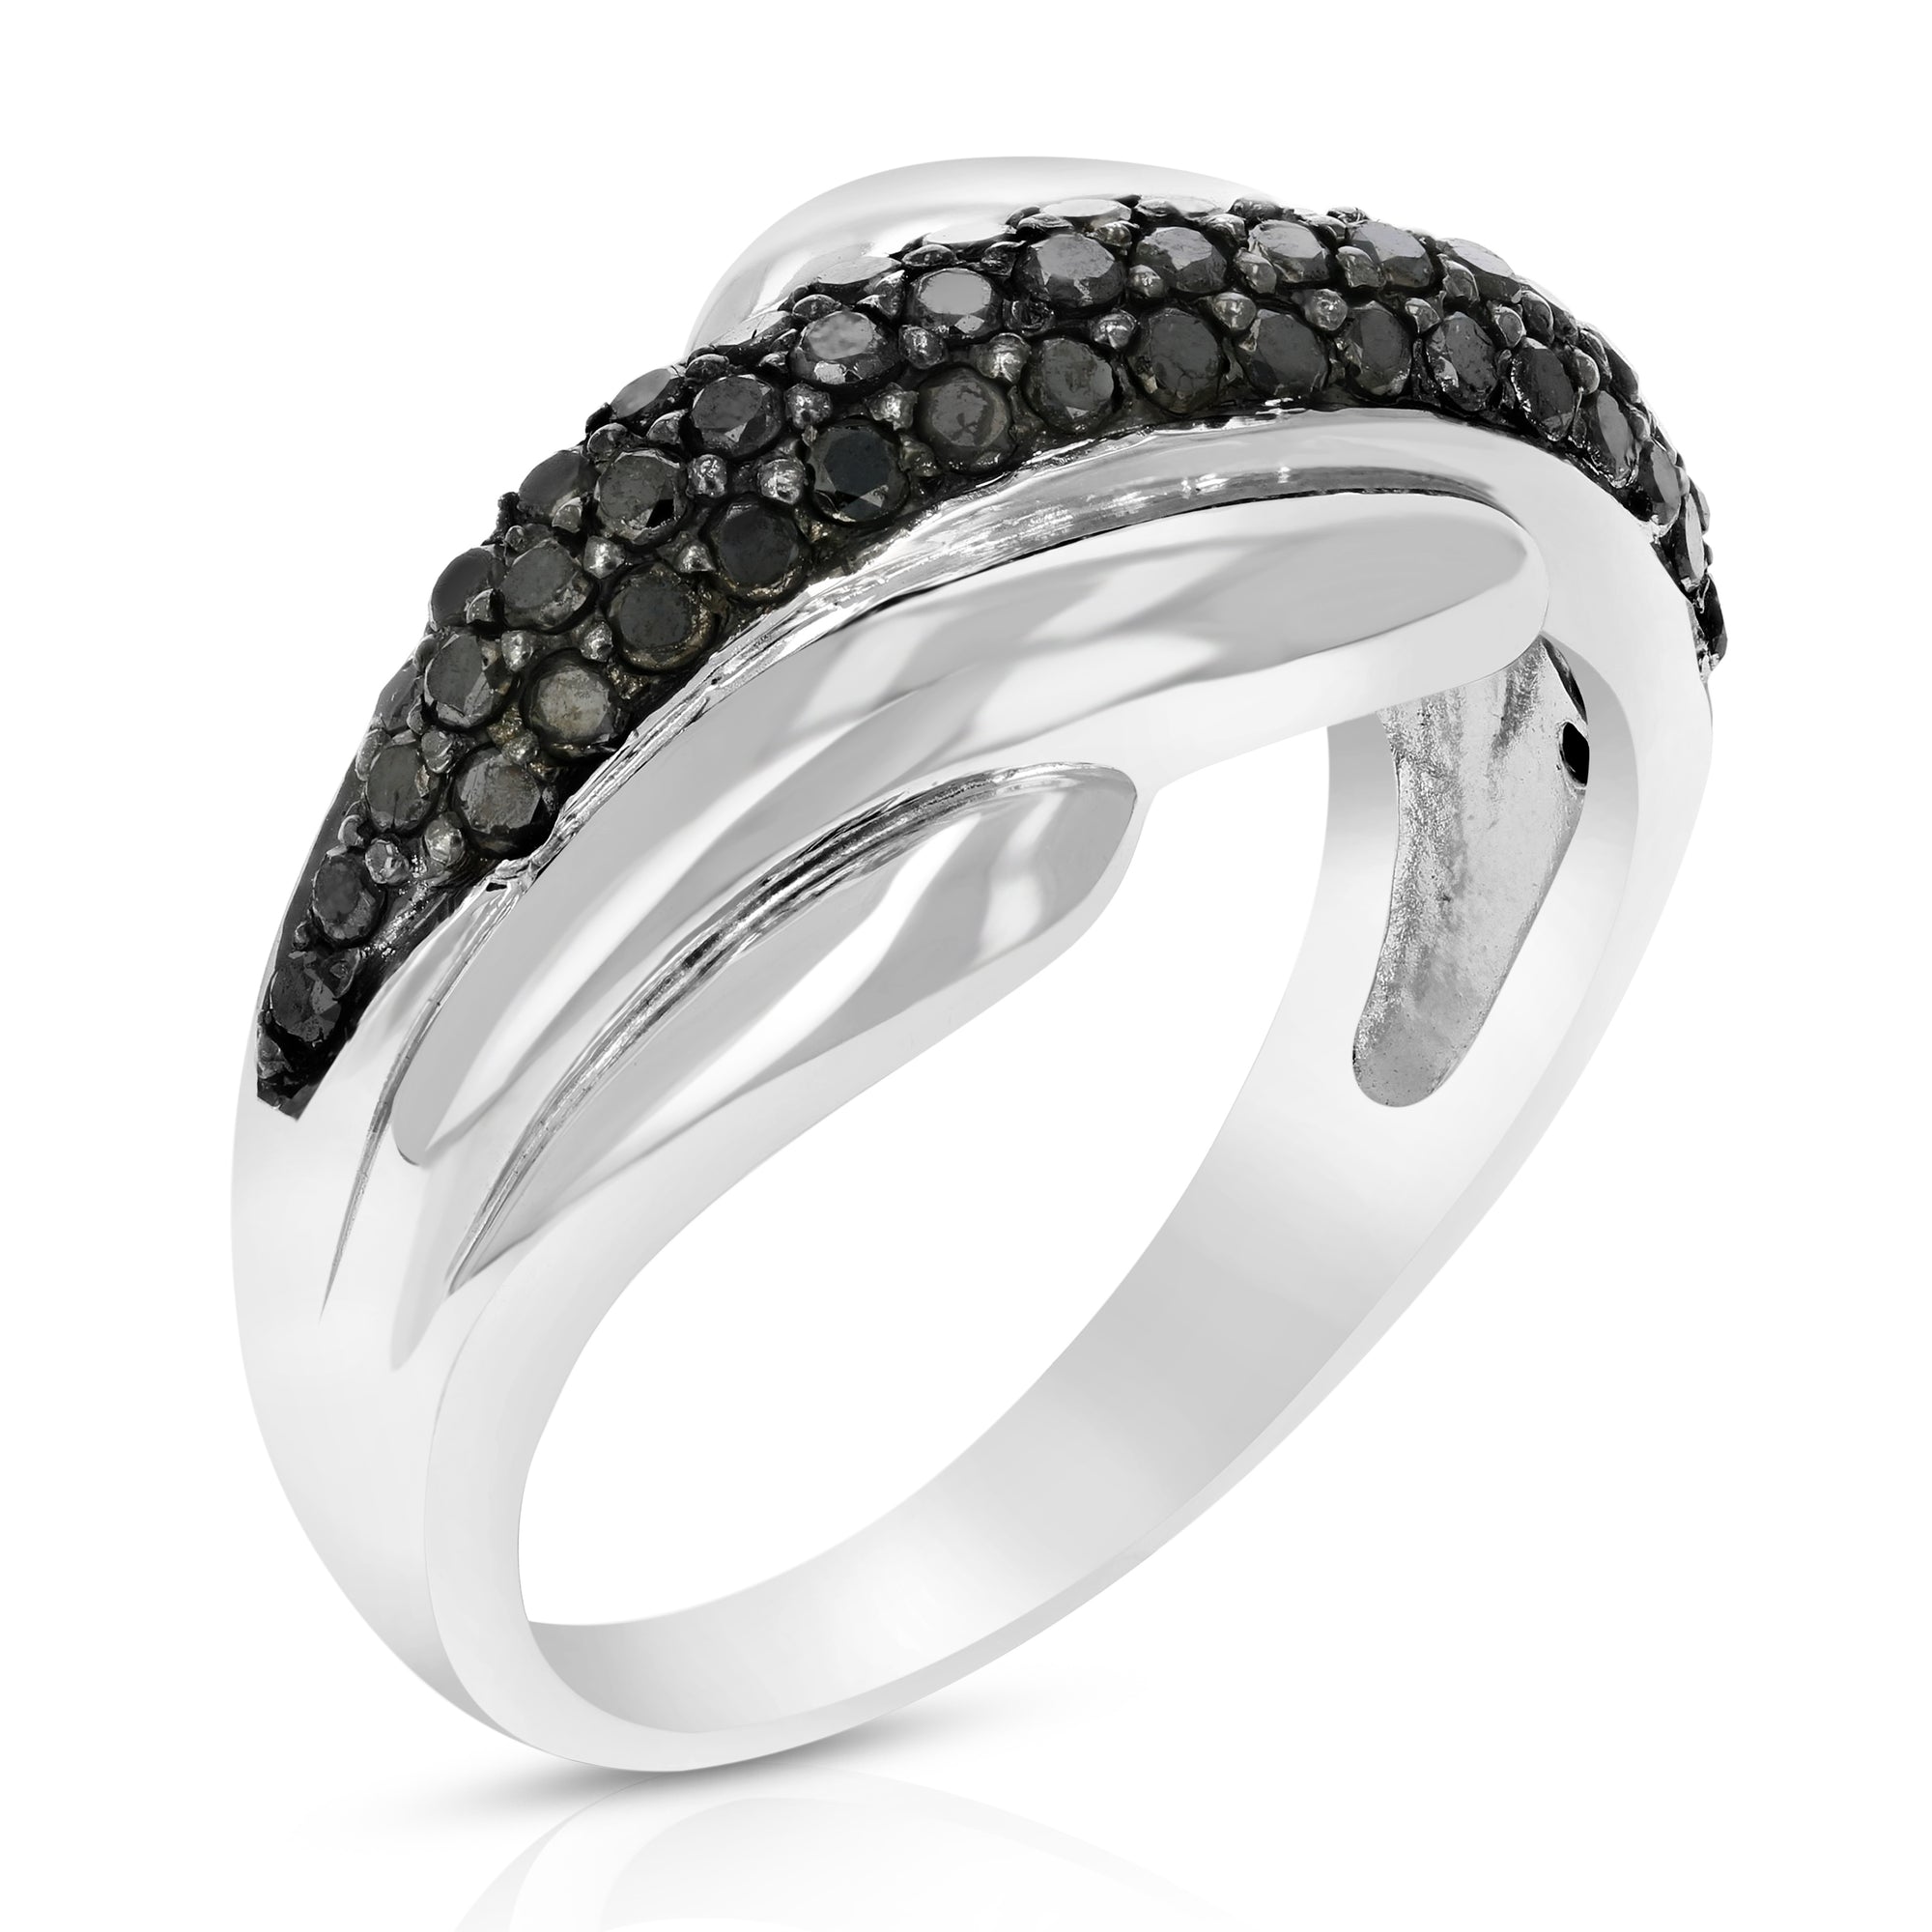 2/3 cttw Black Diamond Wedding Ring .925 Sterling Silver with Rhodium Size 7